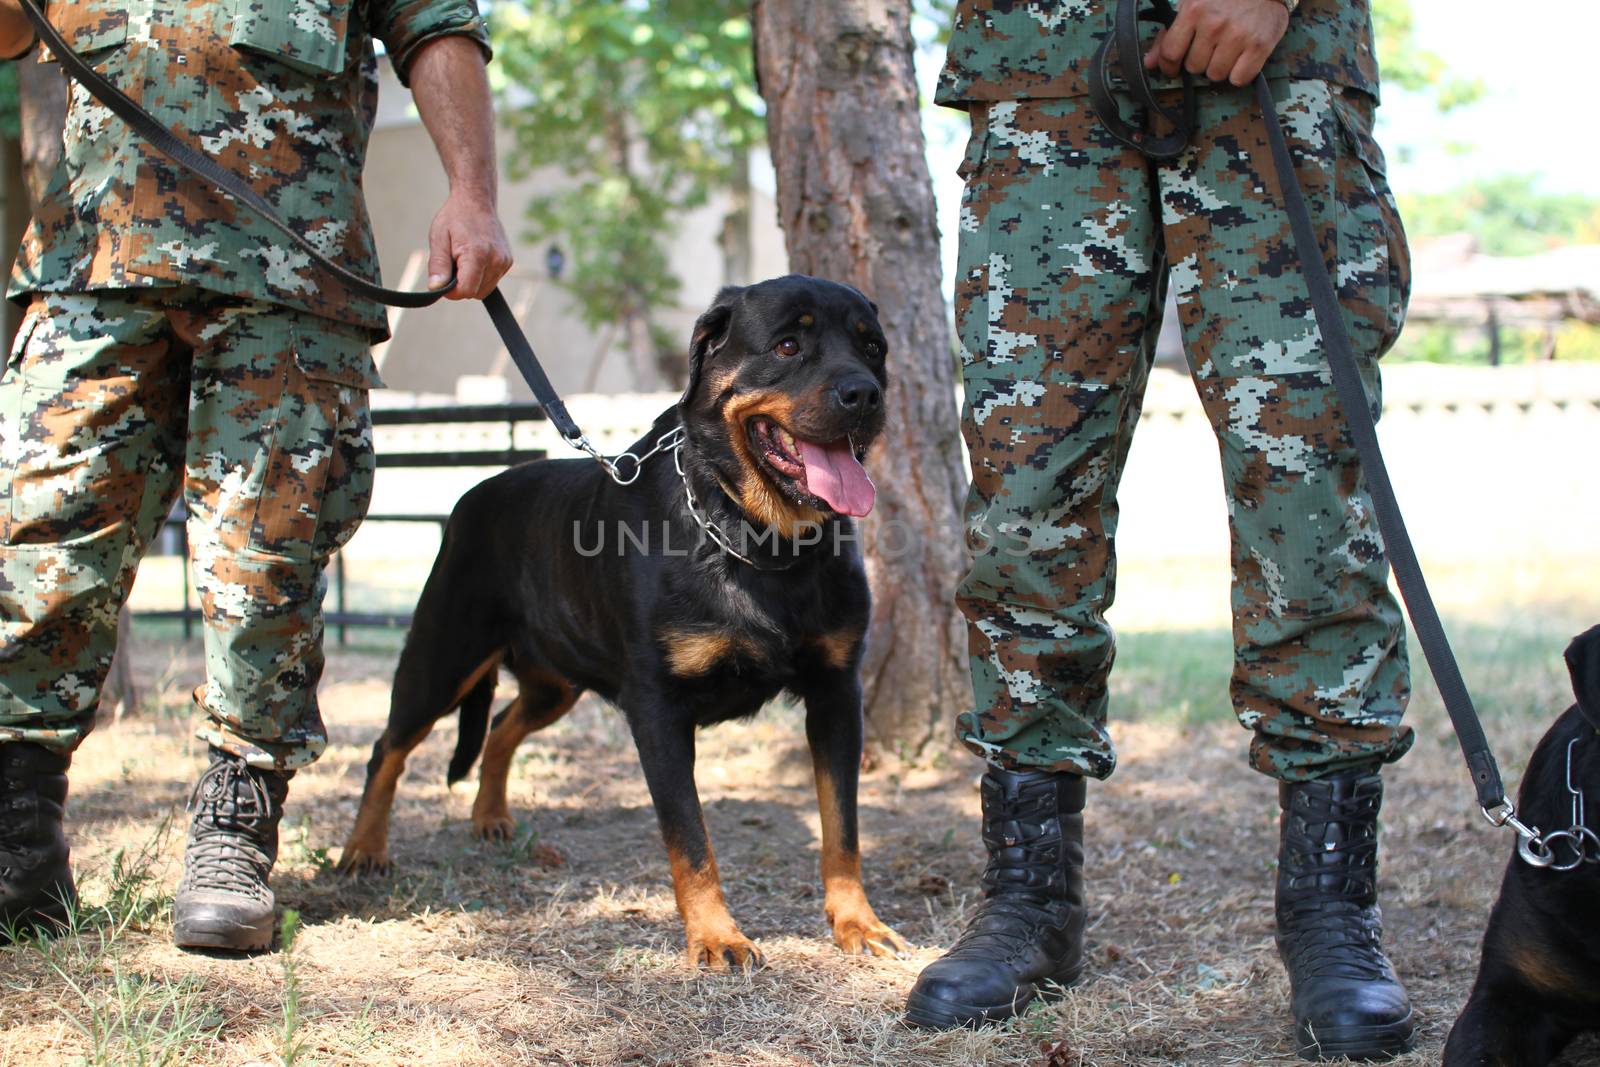 Man in military uniform with military dog, out outdoors